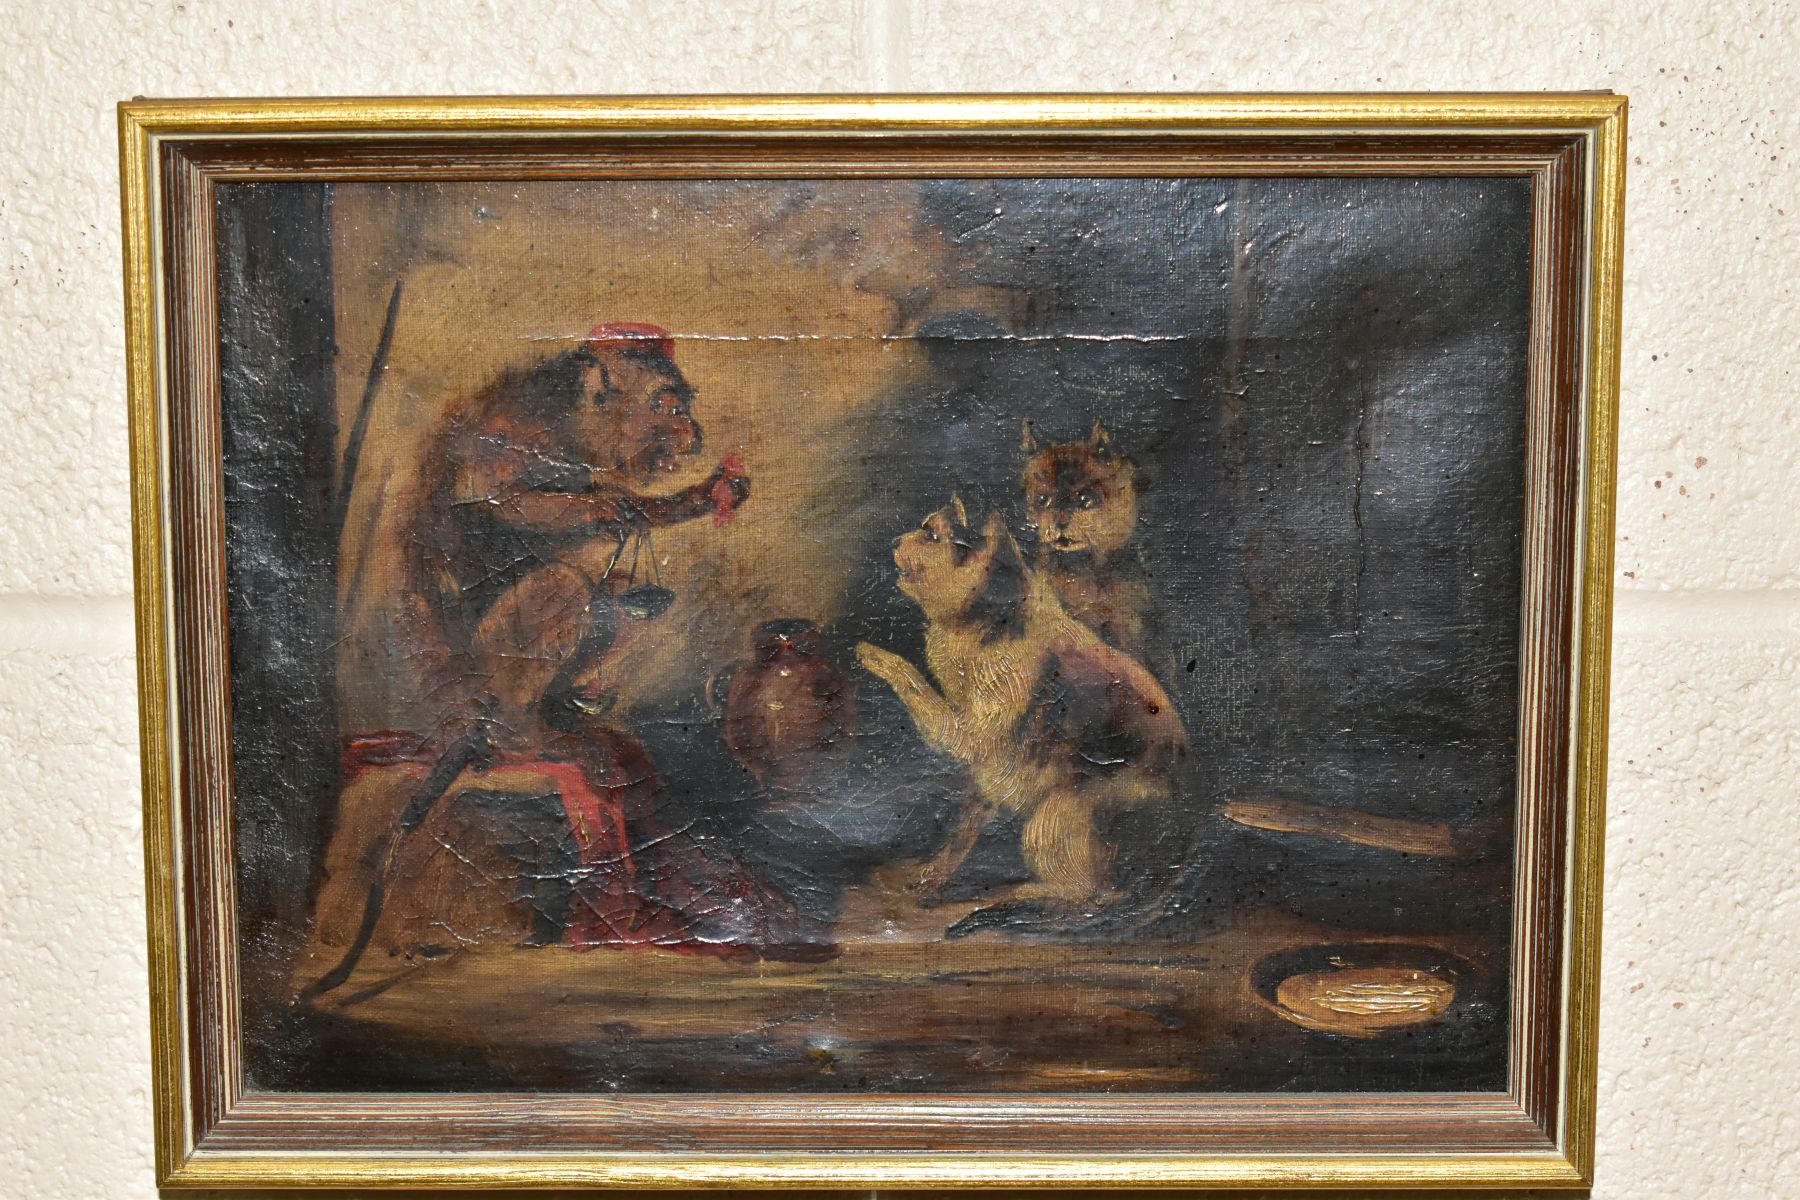 TWO 19TH CENTURY SCHOOL OILS ON CANVAS, the first depicts a dog wearing a red jacket torturing a cat